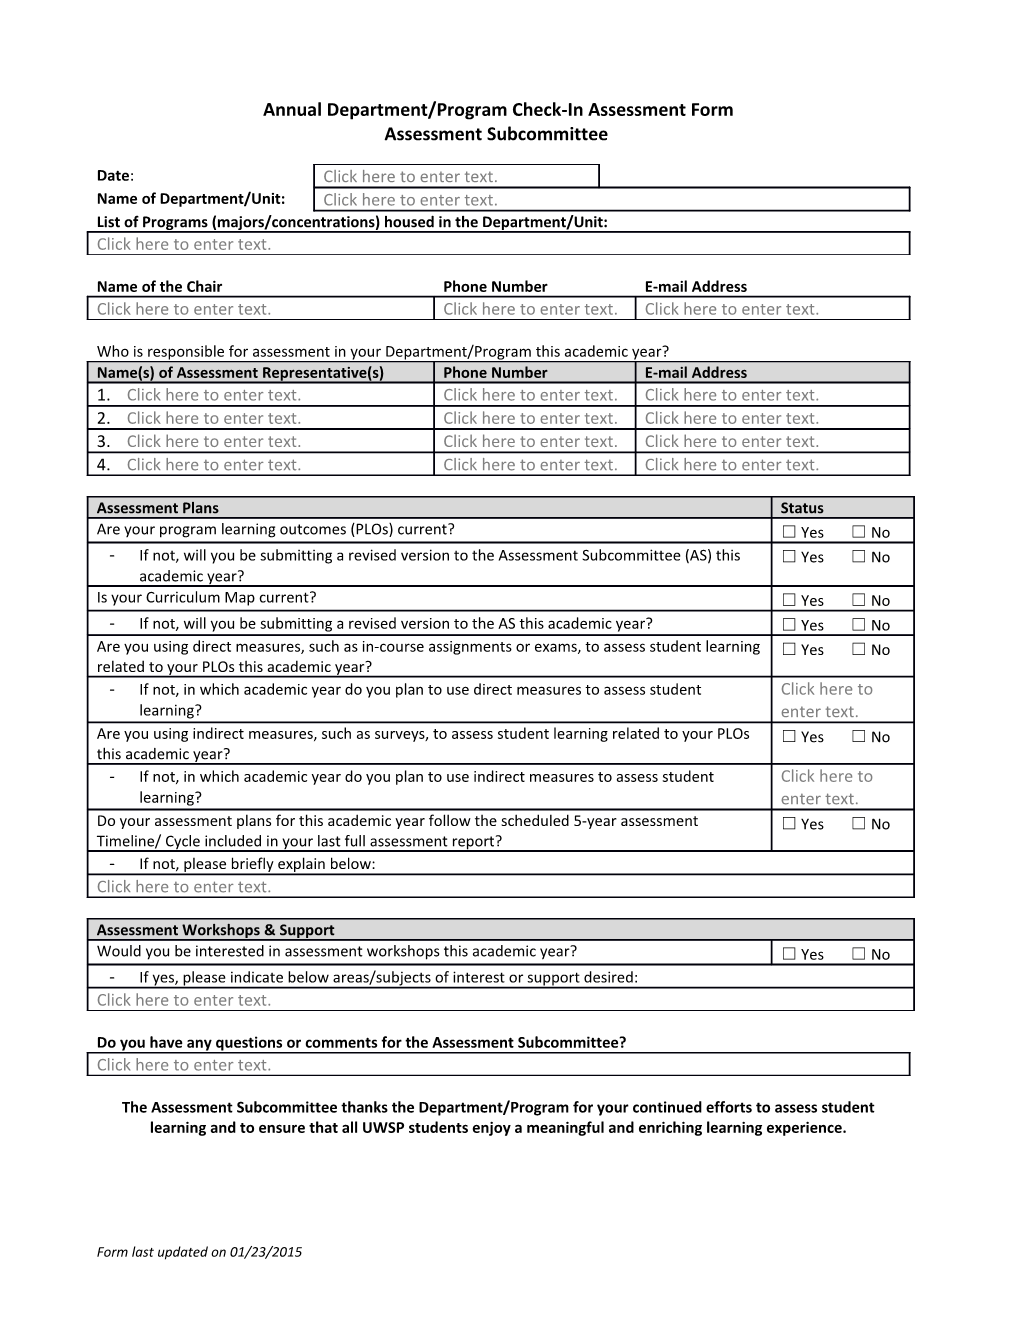 Annual Department/Programcheck-In Assessment Form